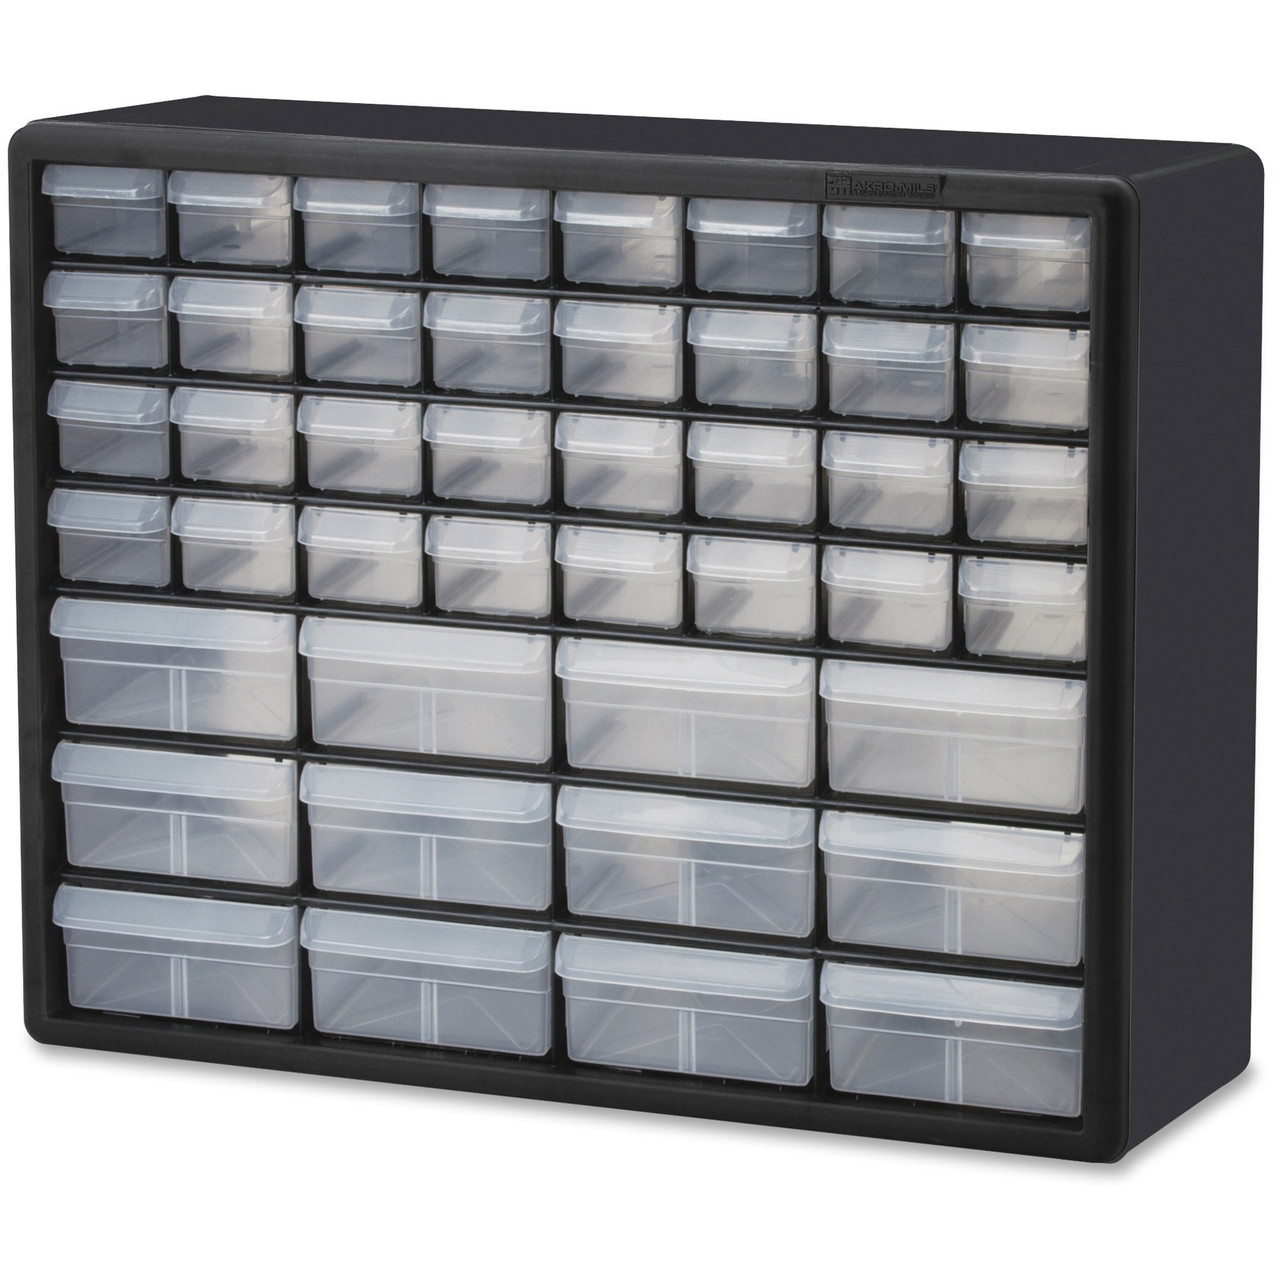 Akro-Mils 10144 44-Drawer Stackable Storage Cabinets